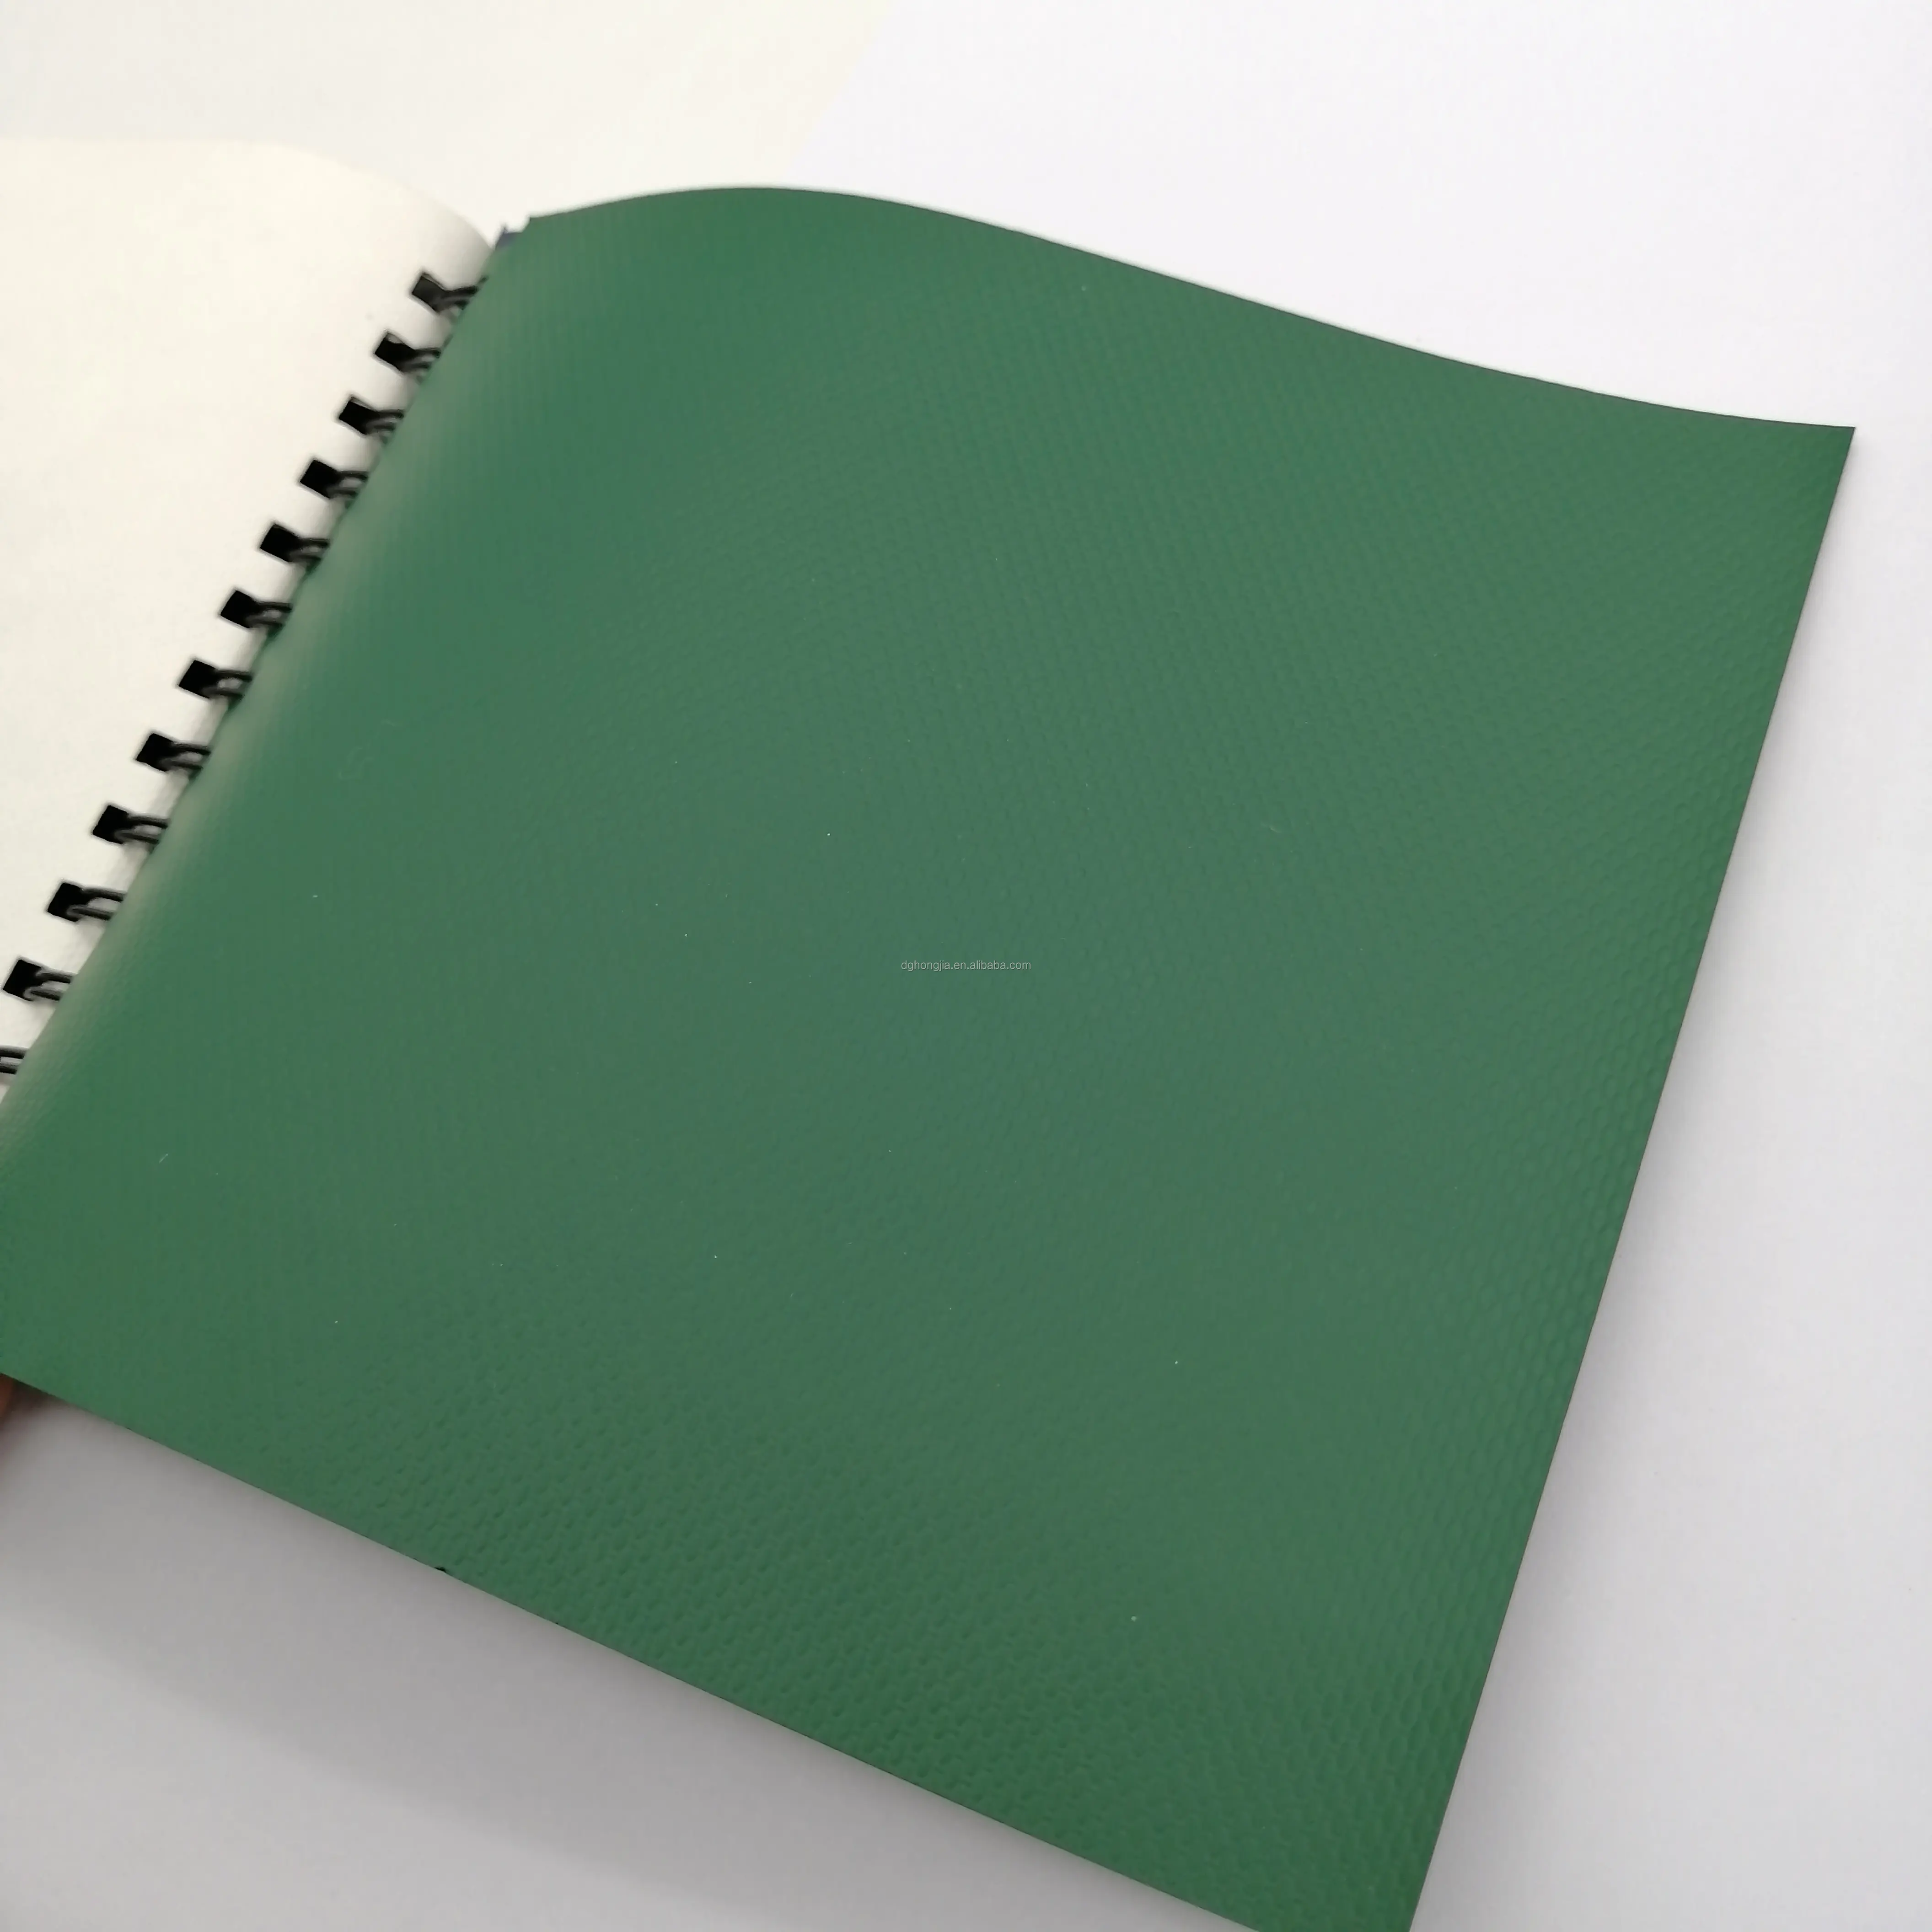 300gsm Soft Touch Latex Color Cards Cardstock Cover Paper Dark Red Dark Green for Notebook